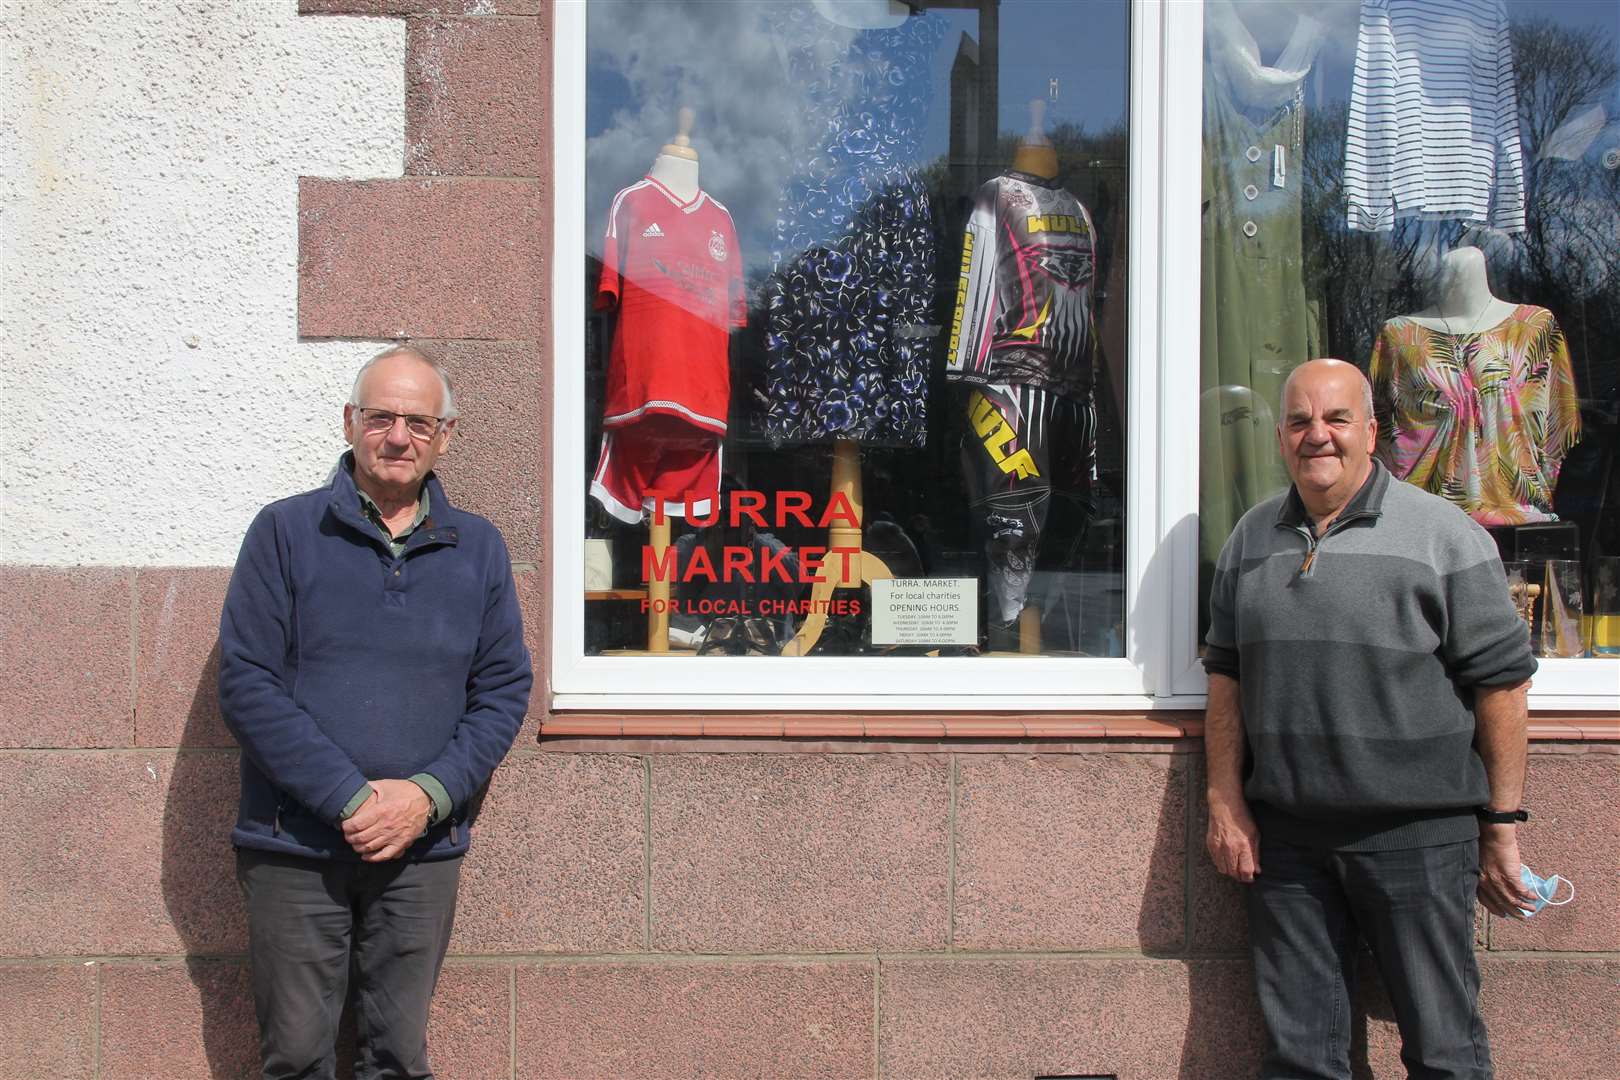 Volunteers Stewart Whyte and Michael Hendry at the opening of Turra Market. Picture: Kirsty Brown